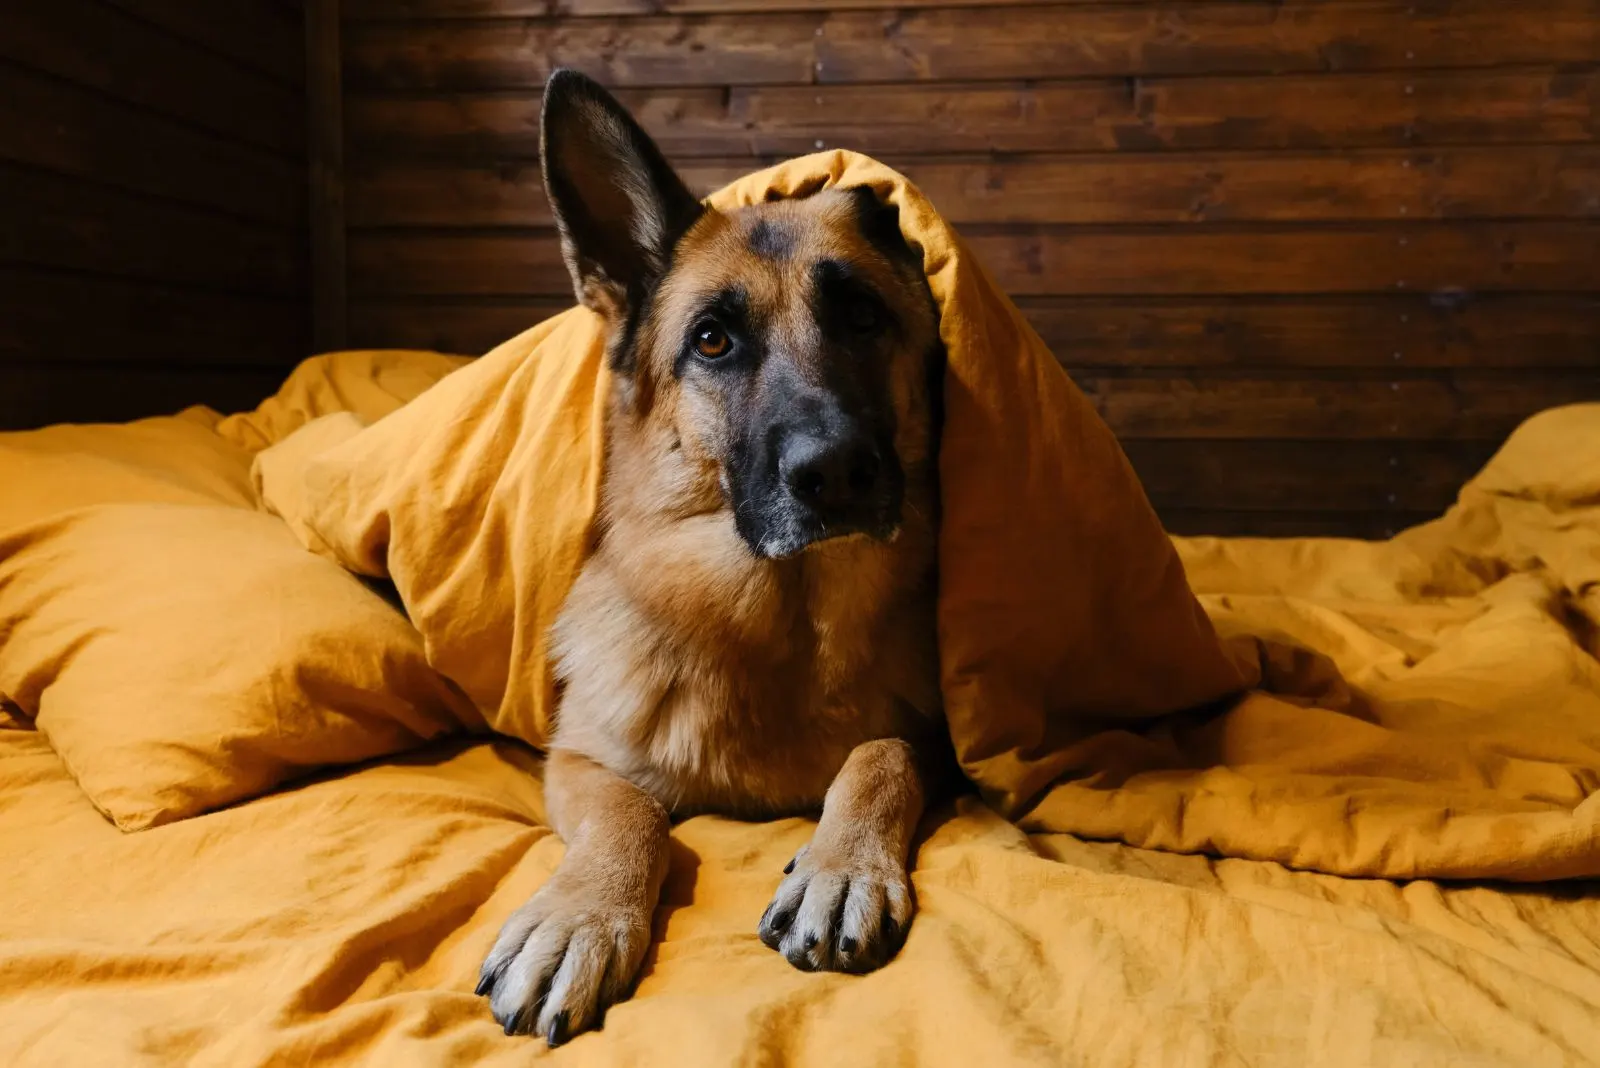 German shepherd with a yellow quilt on his head